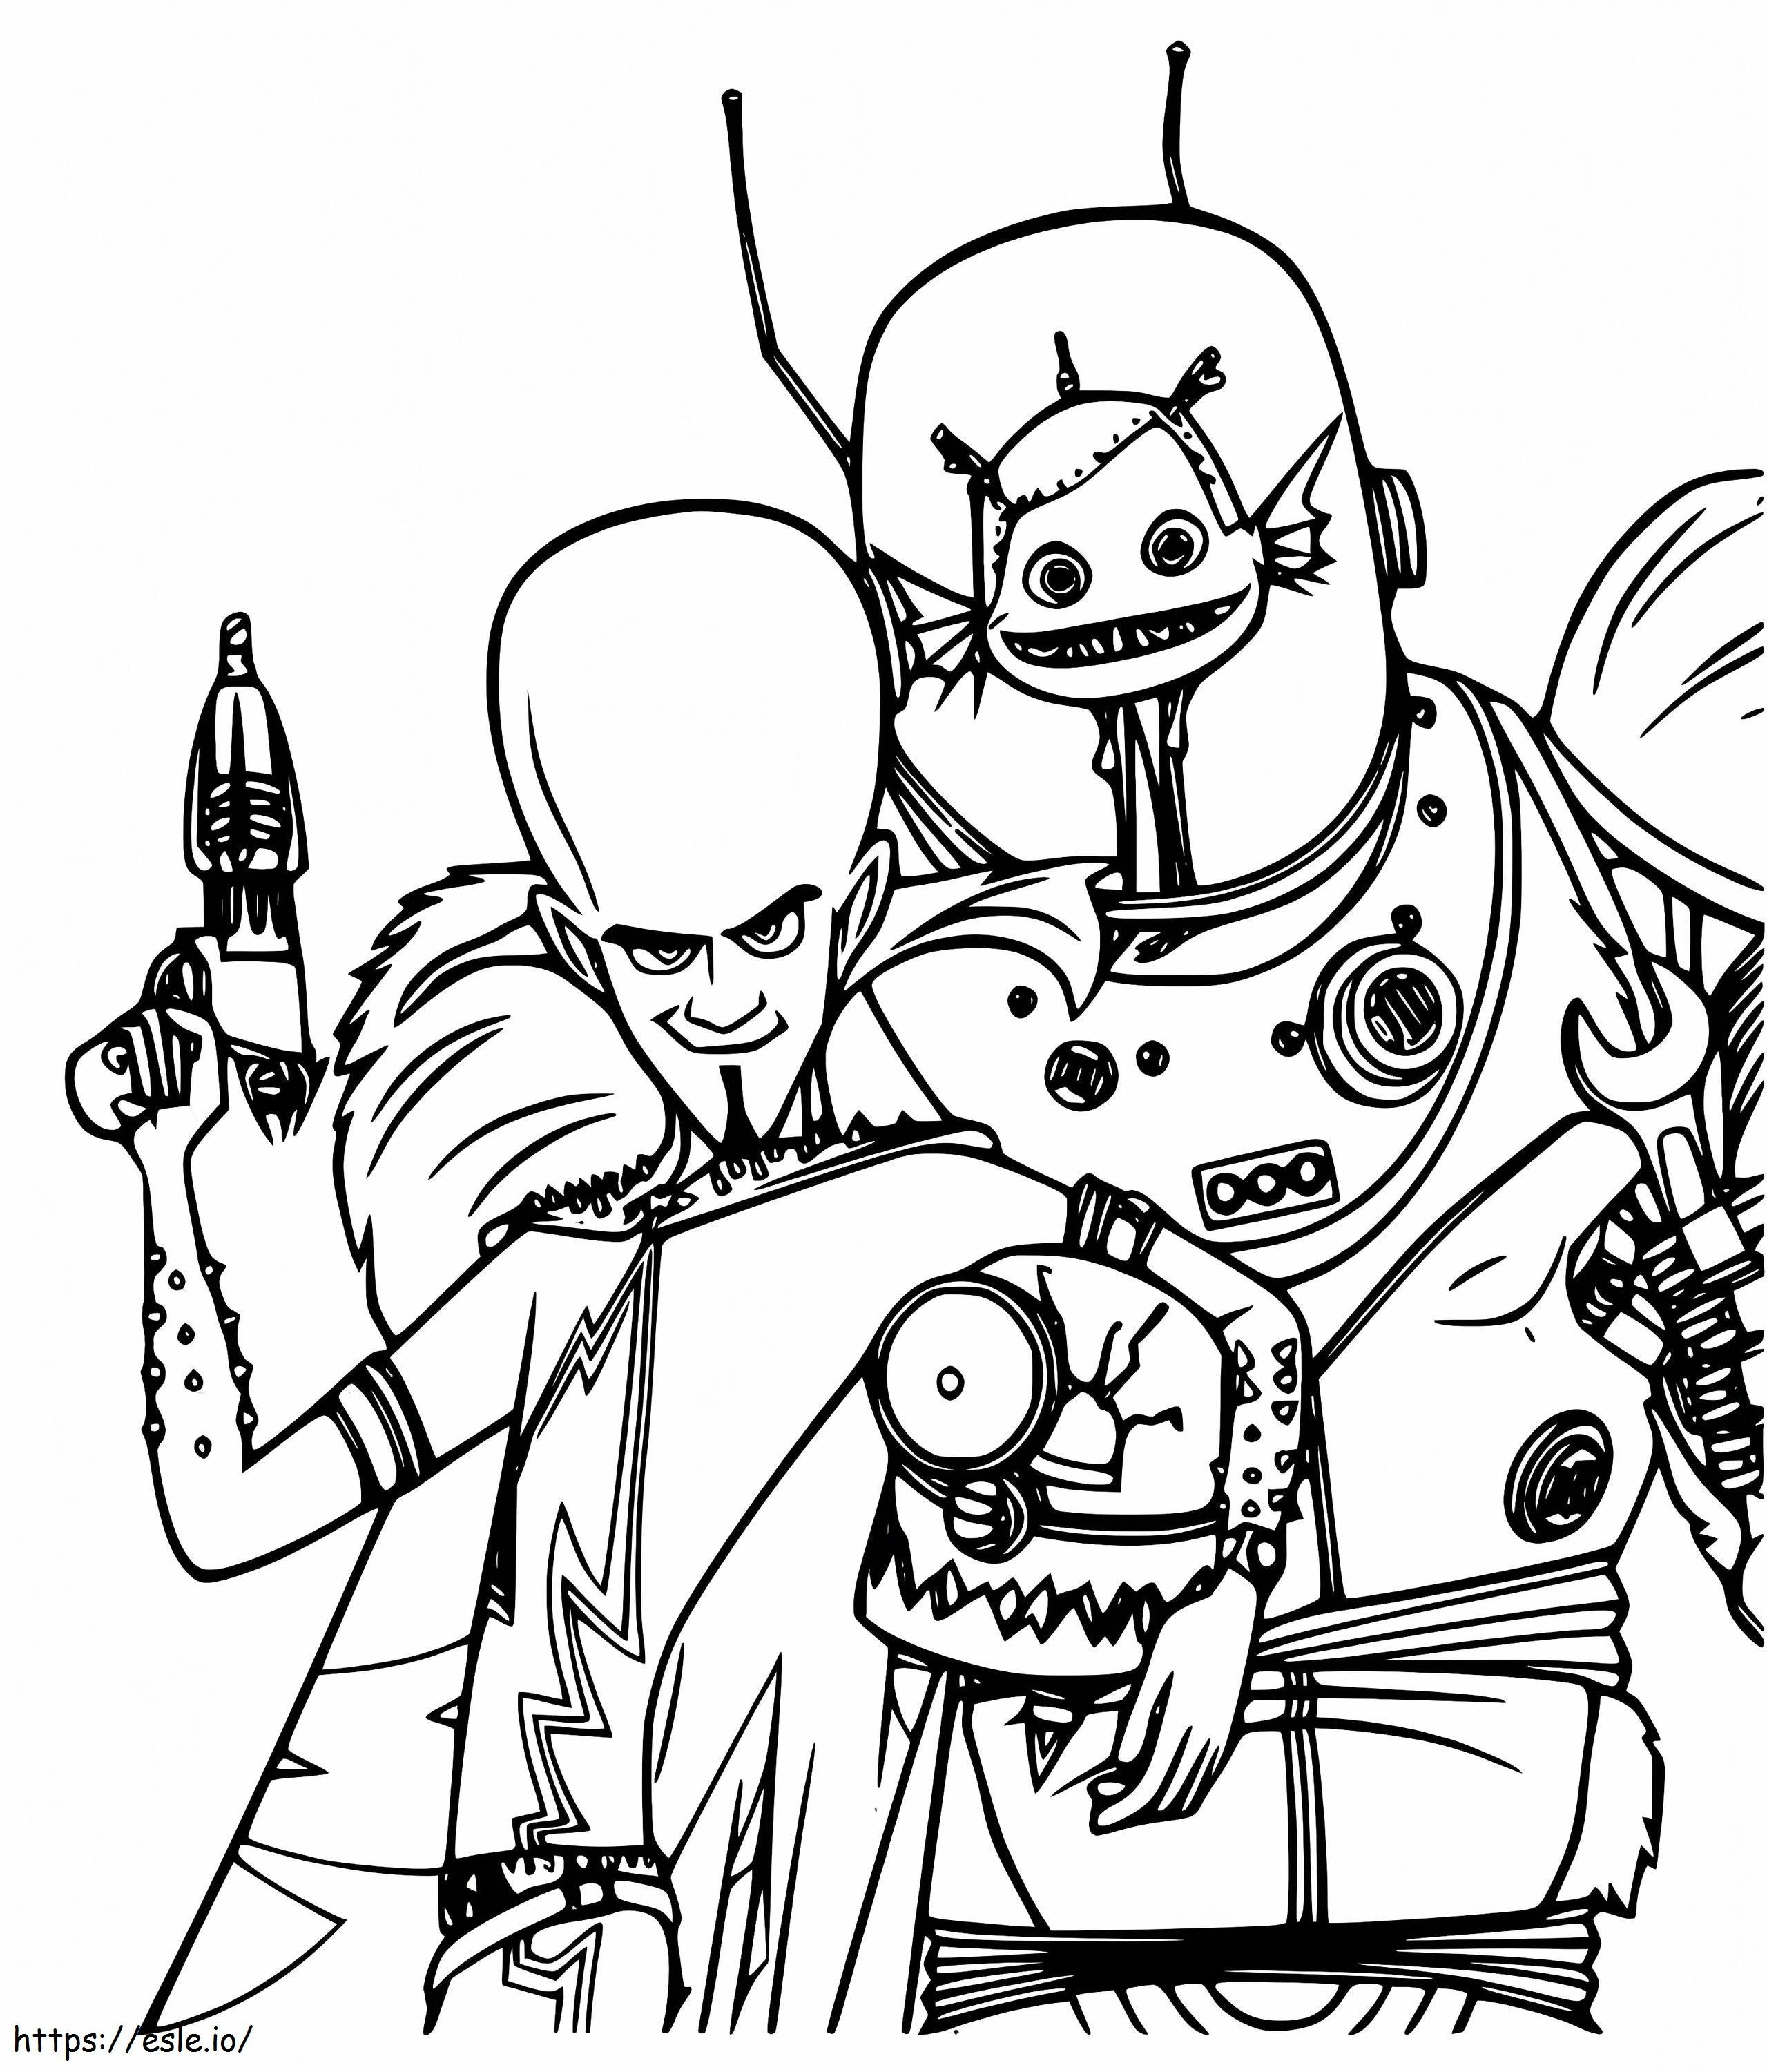 Megamind And Minion coloring page